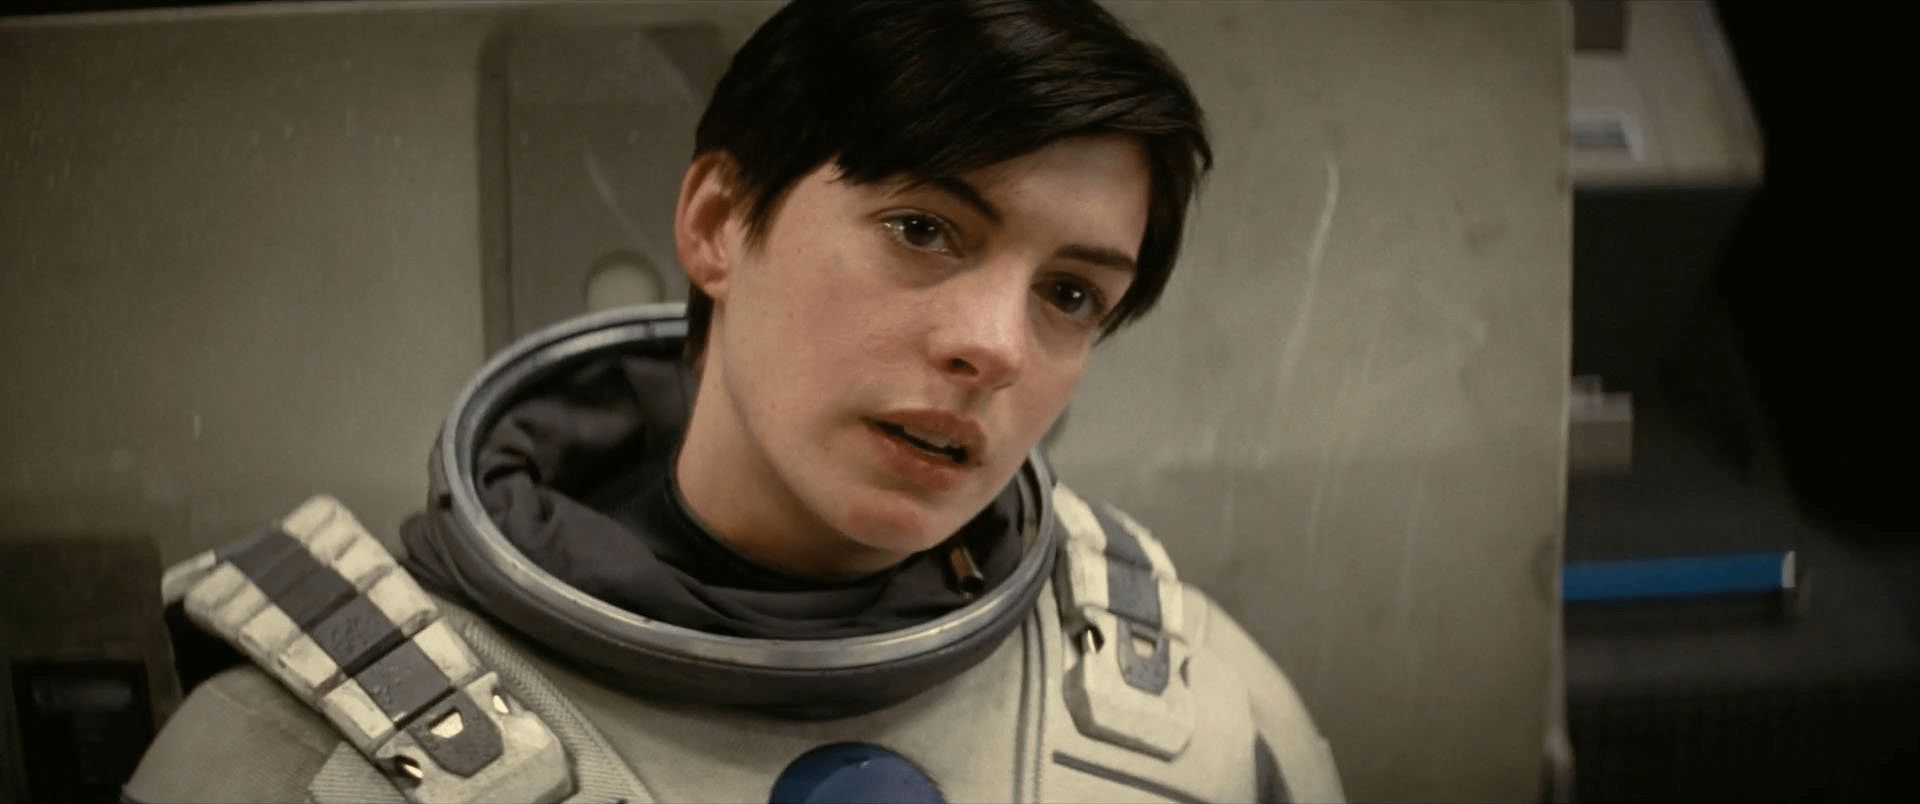 Every Anne Hathaway Movie Ranked by Release Order